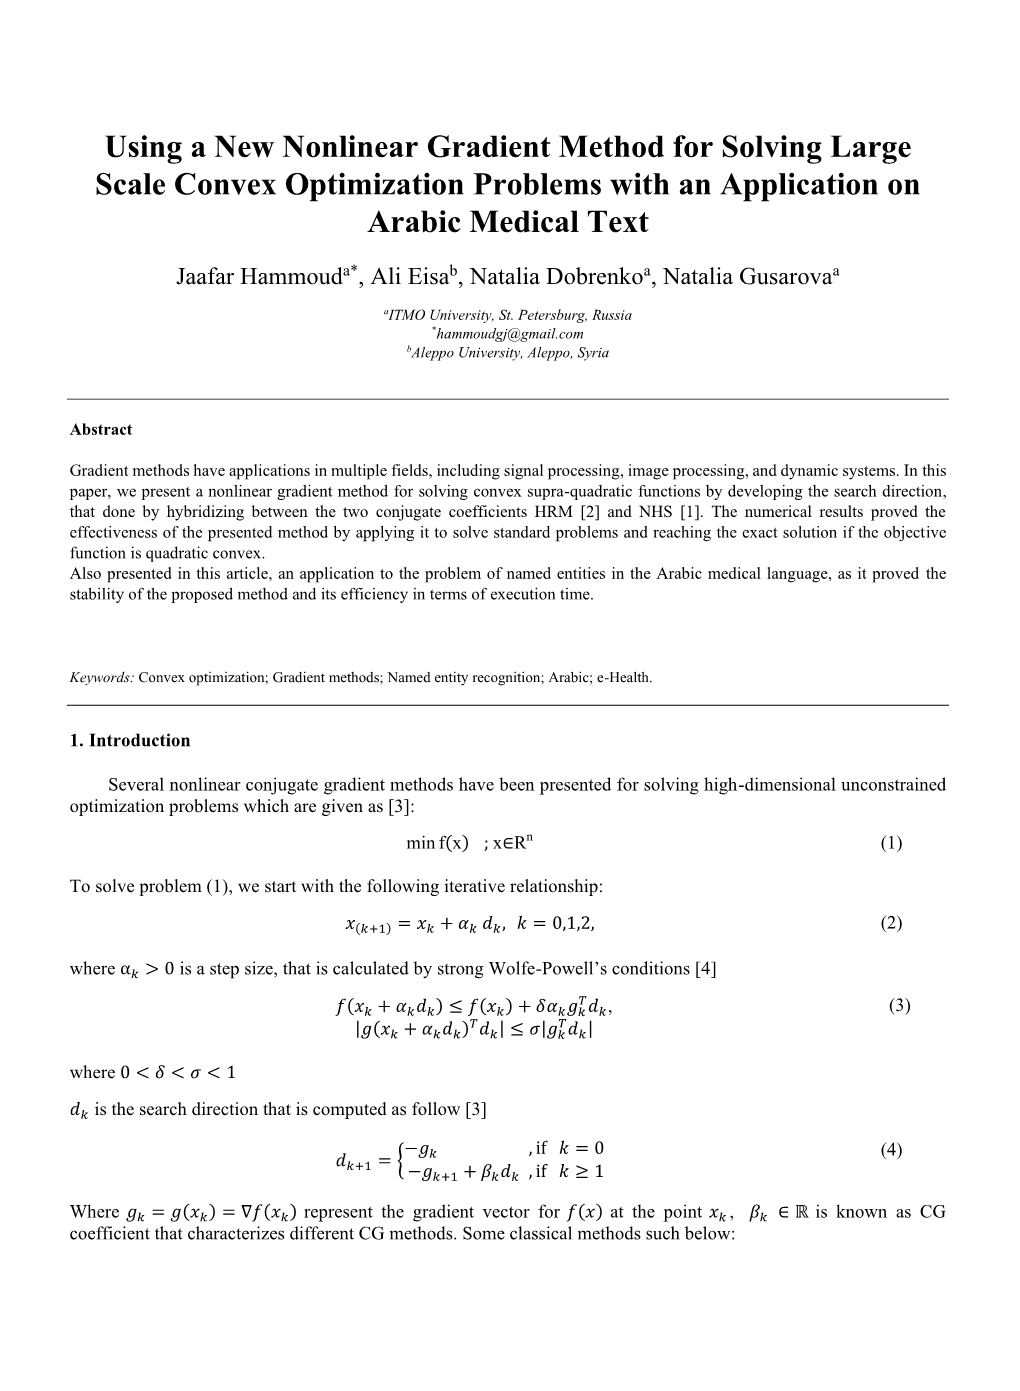 Using a New Nonlinear Gradient Method for Solving Large Scale Convex Optimization Problems with an Application on Arabic Medical Text